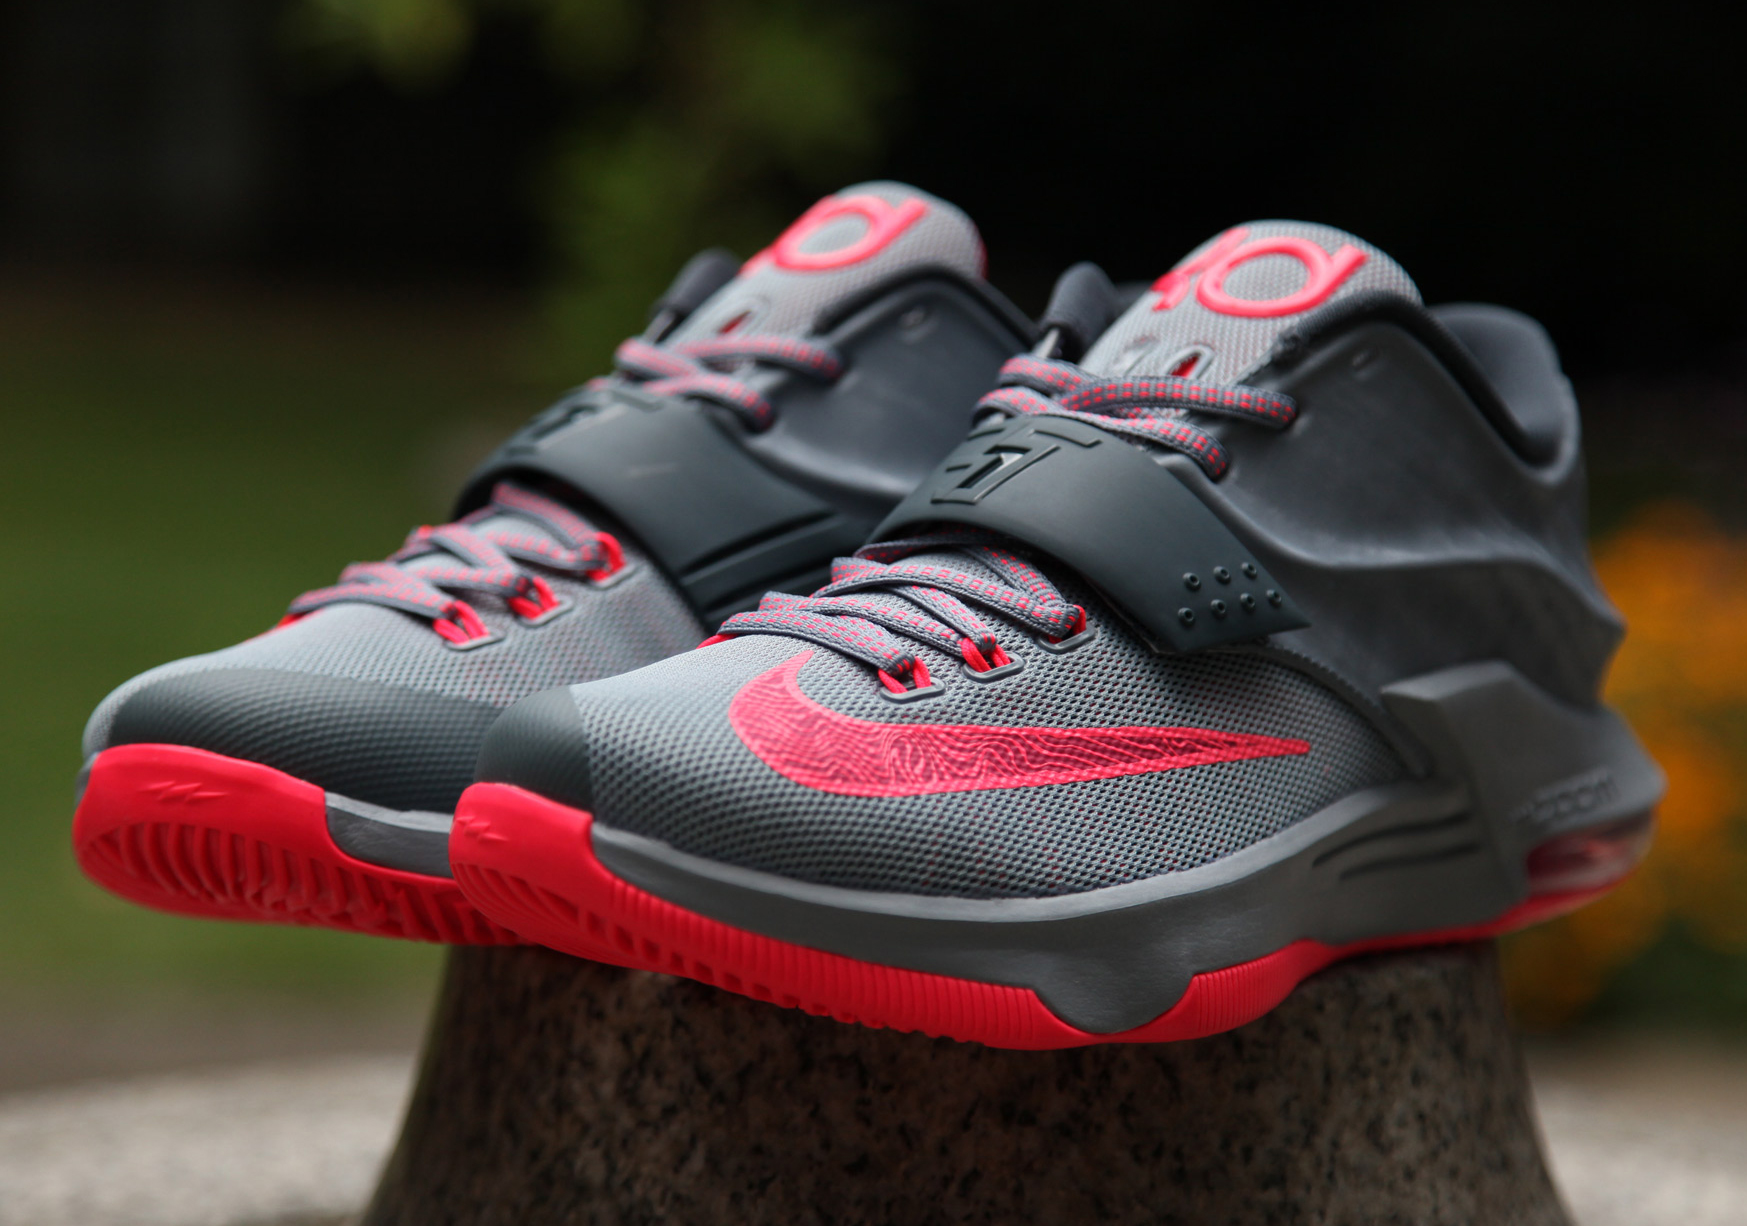 Nike KD 7 "Calm Before The Storm" - Release Reminder